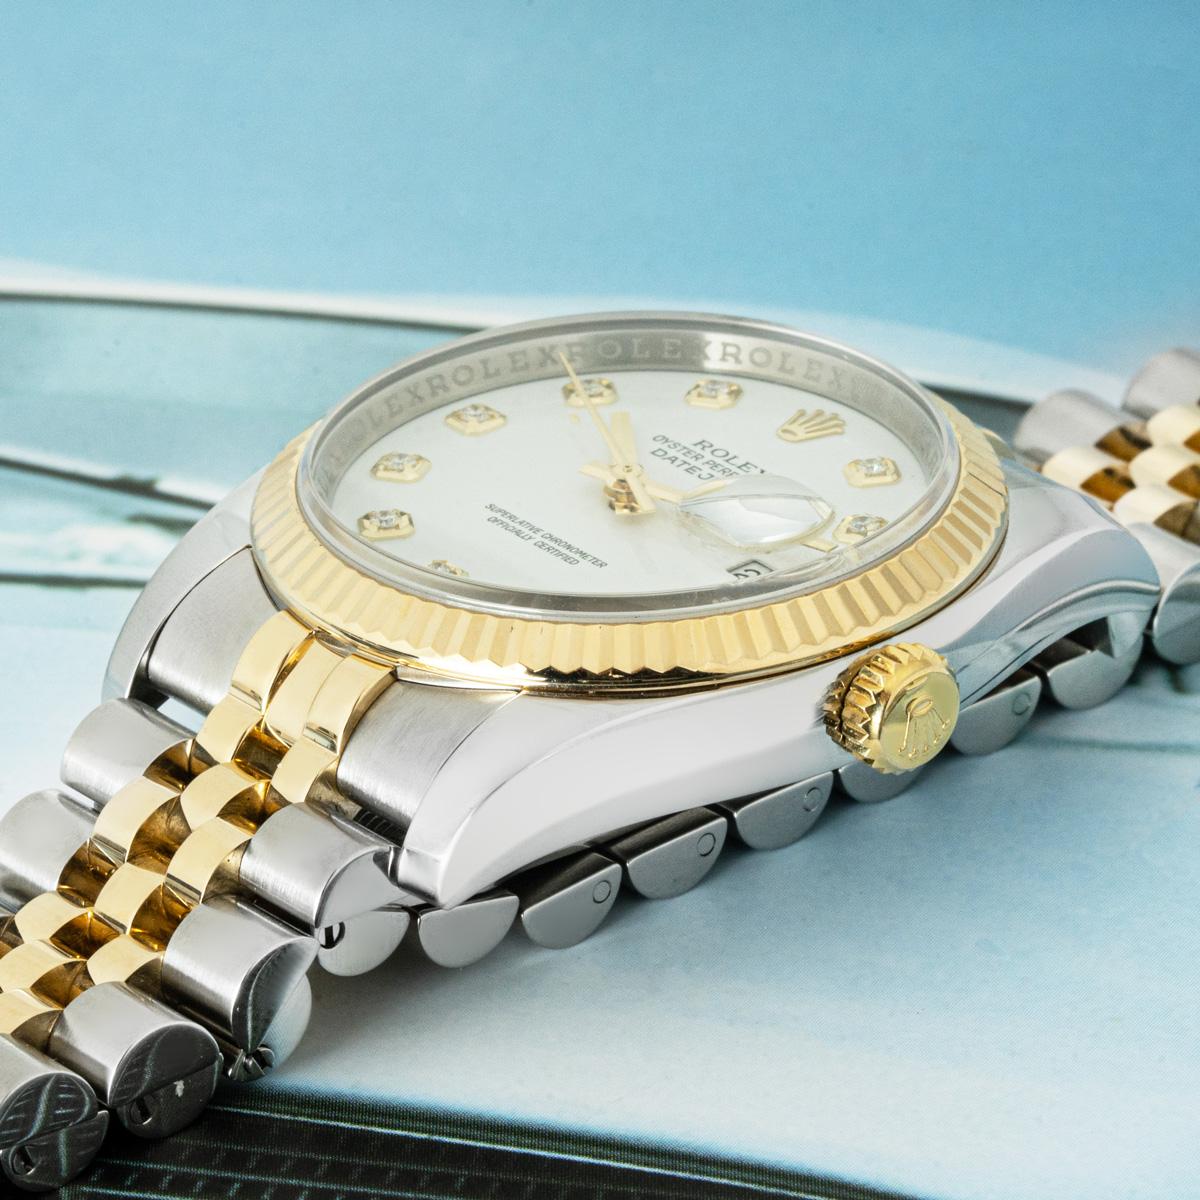 A steel and gold Datejust by Rolex. Featuring a white dial with diamond set hour markers and a yellow gold fluted bezel. Fitted with a sapphire crystal, a self-winding automatic movement and a steel and gold jubilee bracelet equipped with a